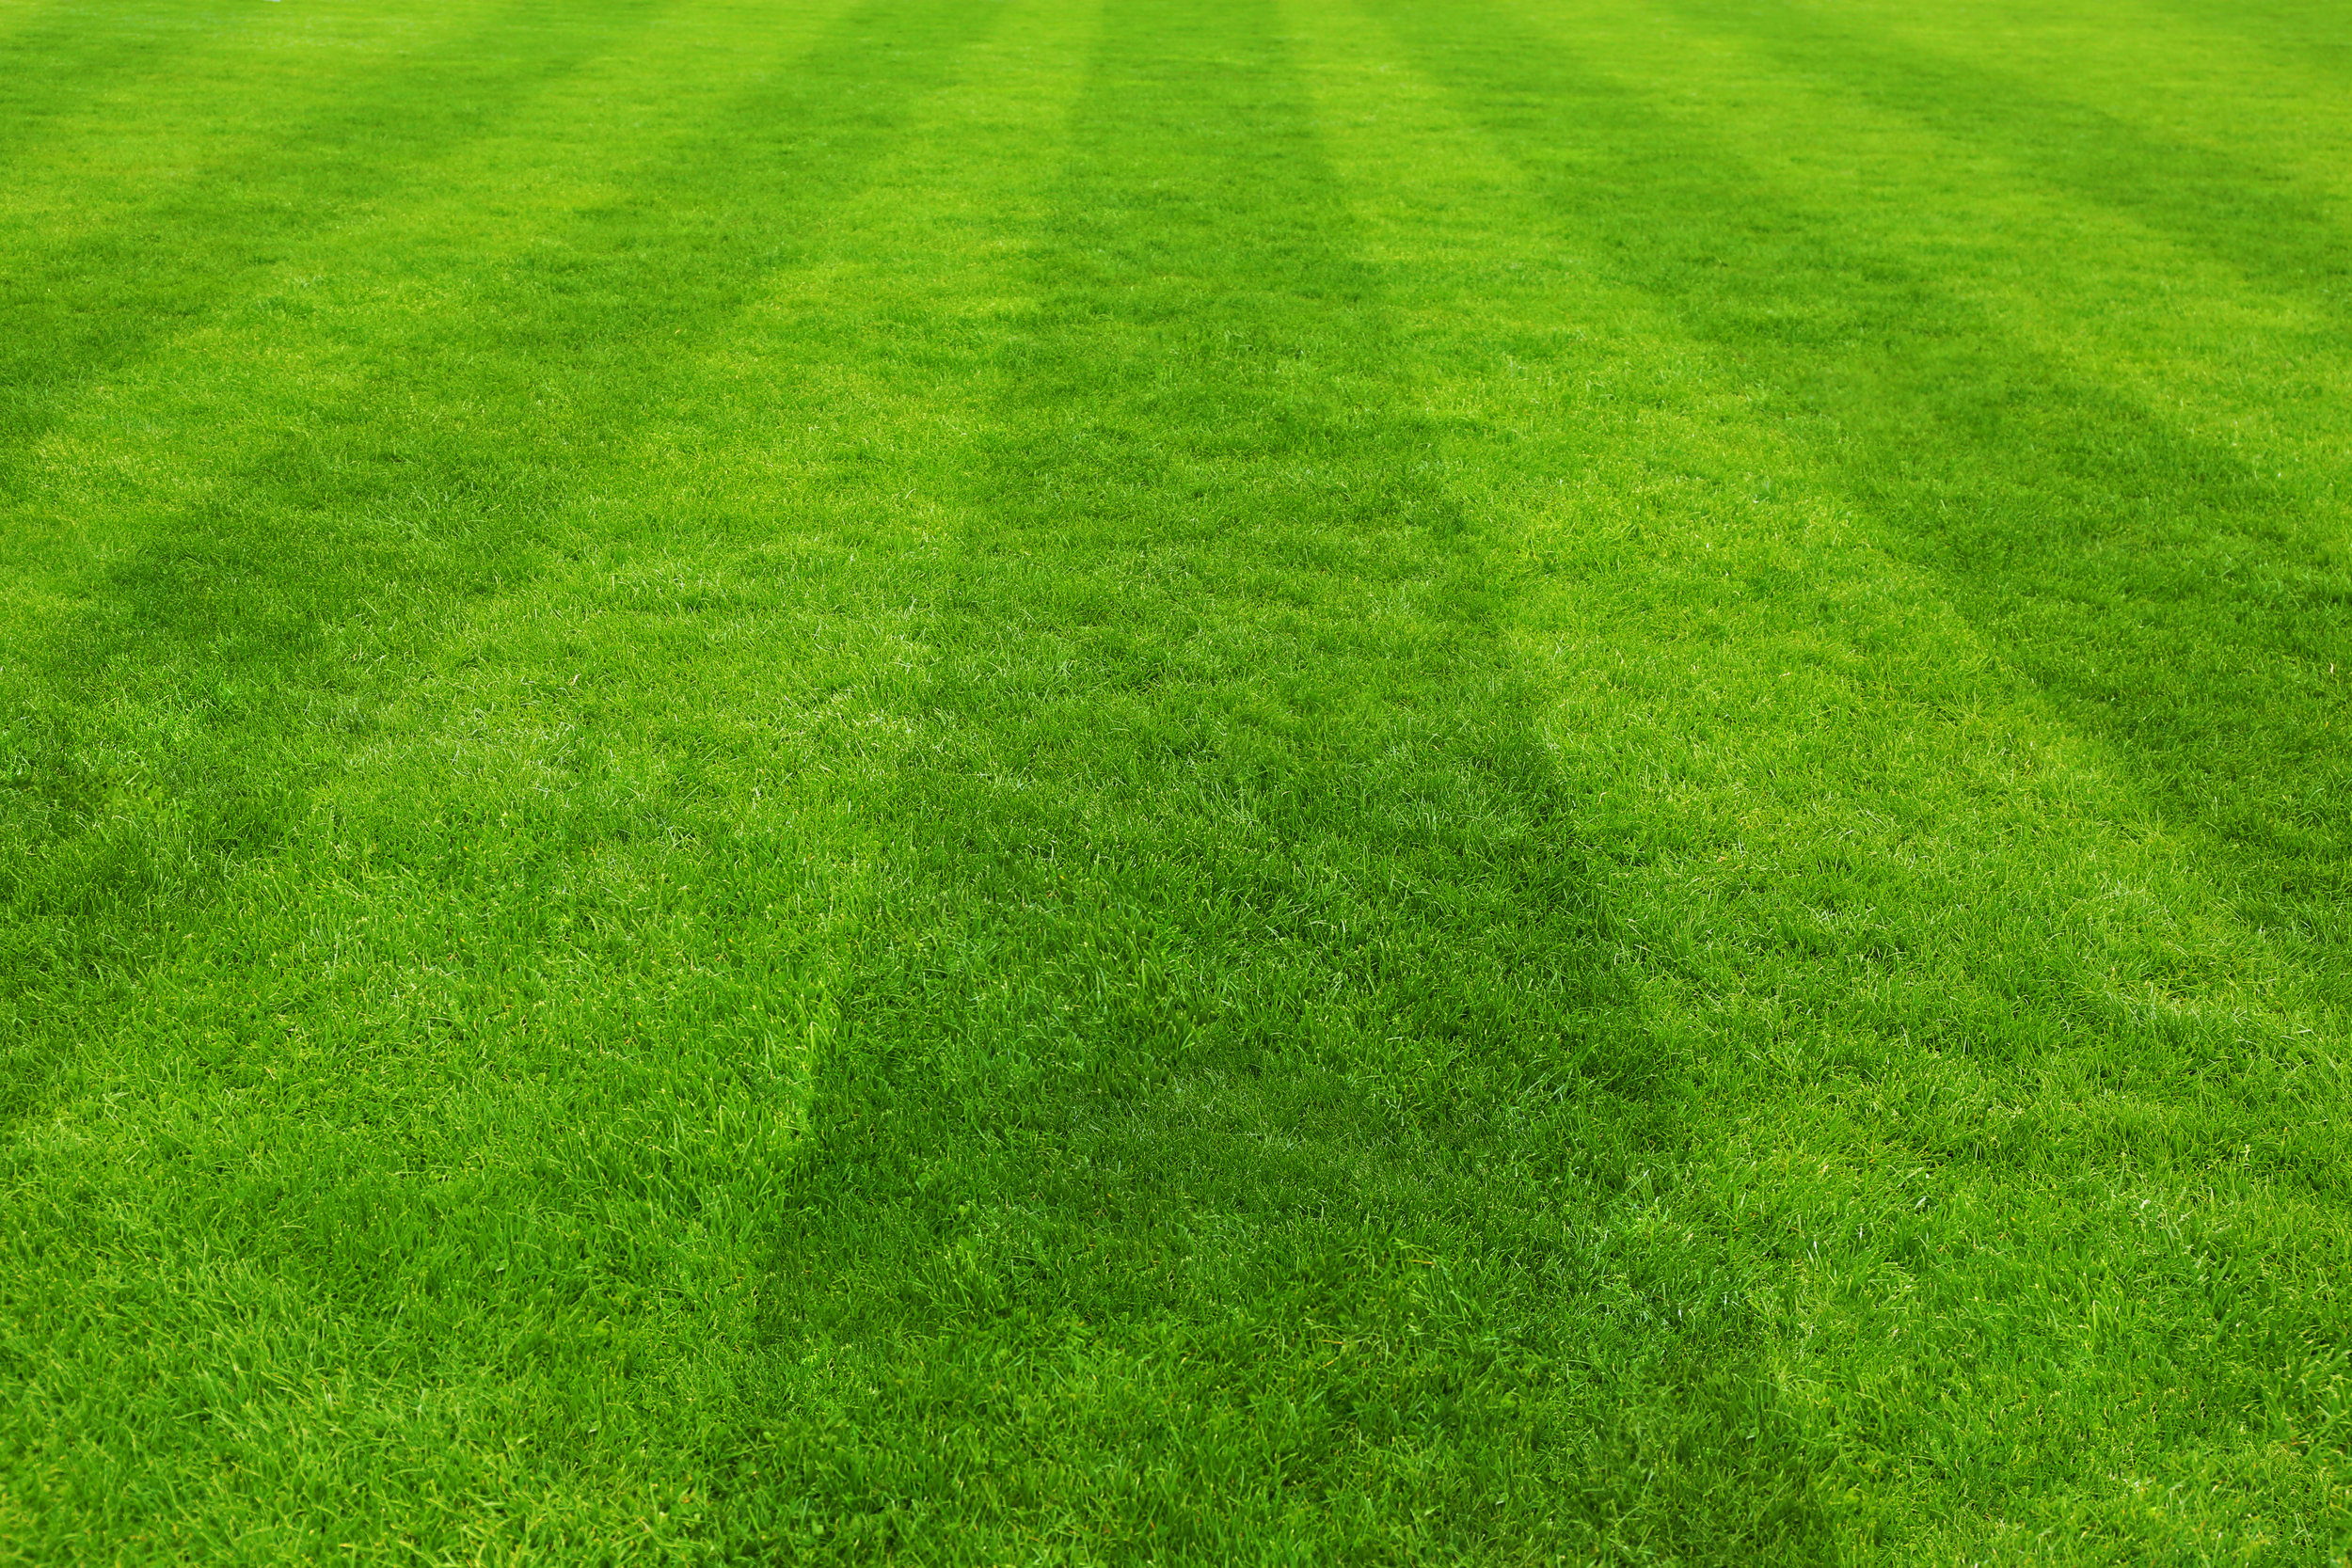 lawn rolling green grass flat smooth lawn